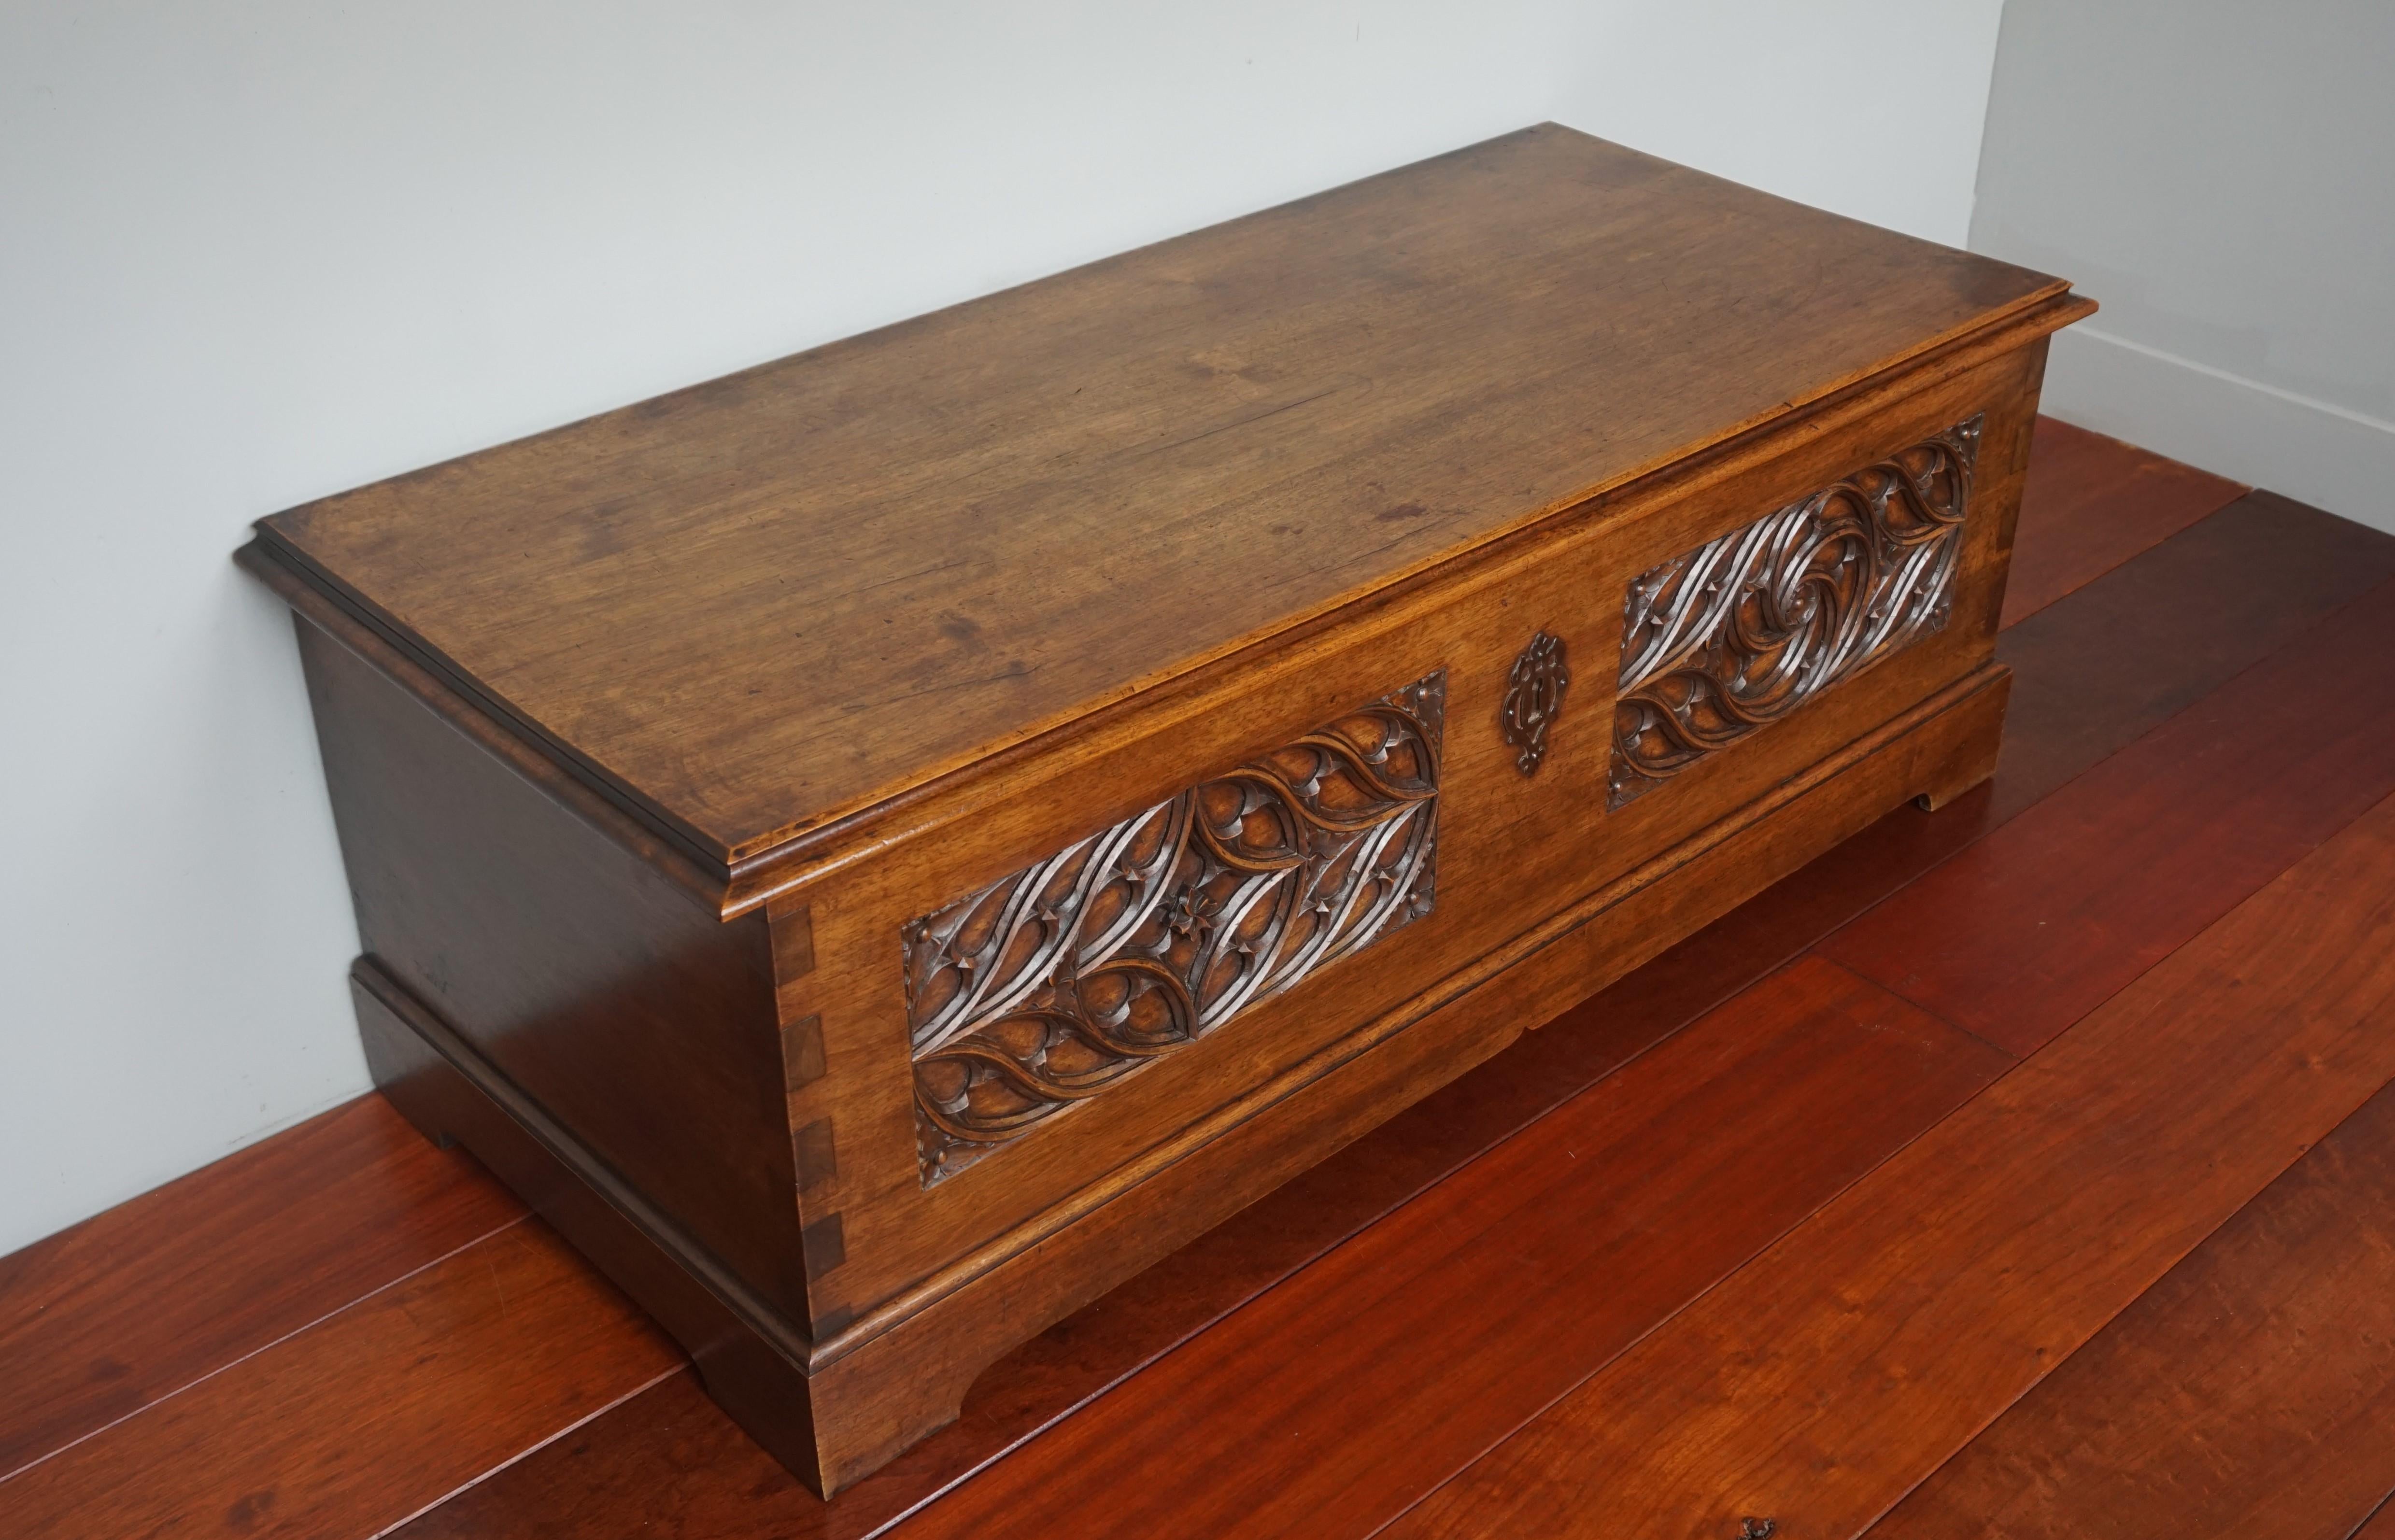 Marvelously hand carved and beautifully decorative Gothic chest.

Because of the quality of the carving, the beautiful overall design and the striking solid walnut structure we feel that this stylish and practical chest was handcrafted in France.